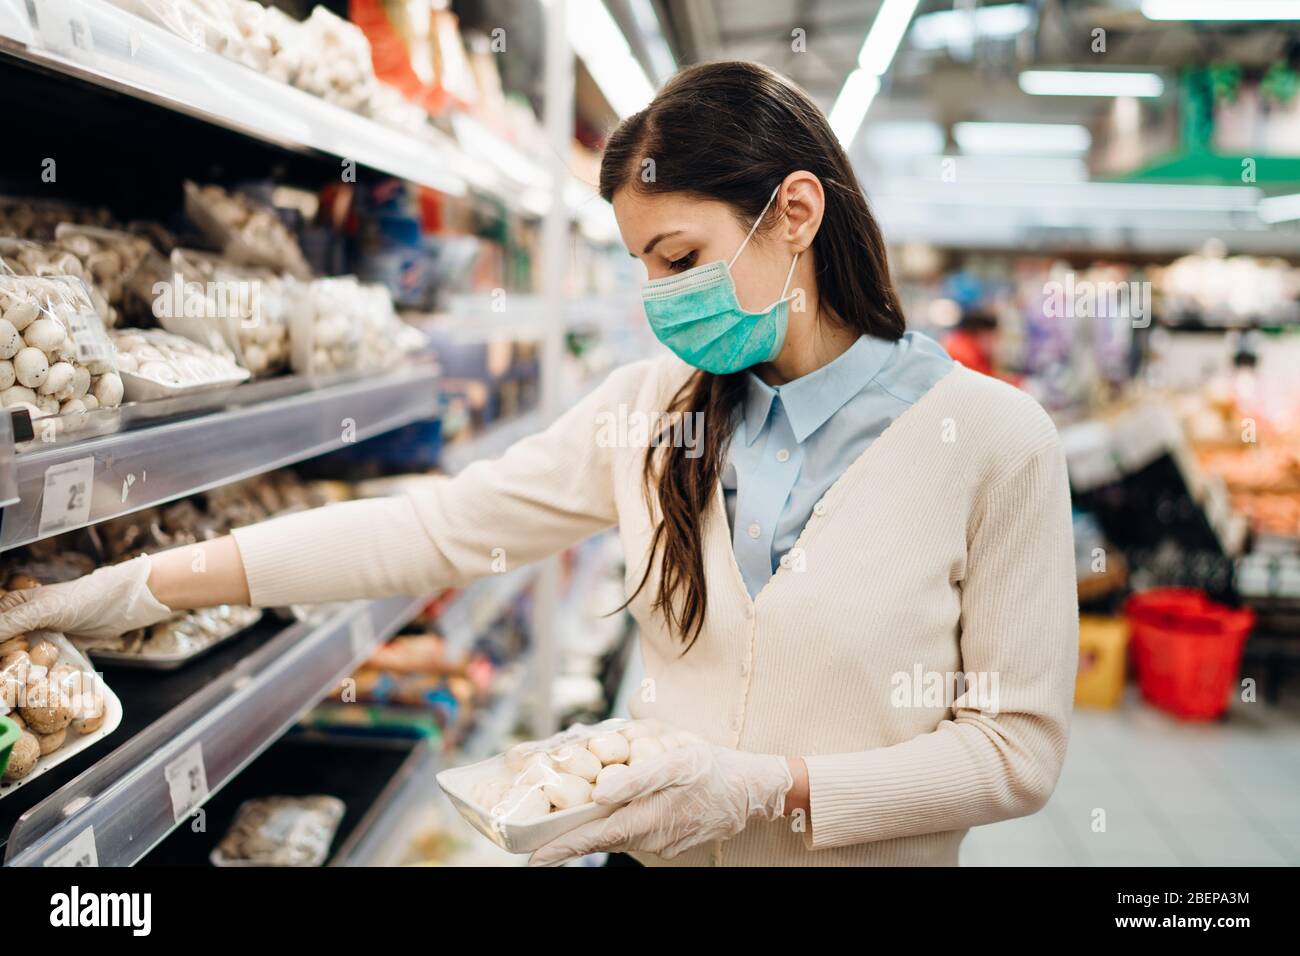 Woman with mask safely shopping for groceries amid the coronavirus pandemic in a stocked grocery store.COVID-19 food buying in supermarket.Panic buyin Stock Photo